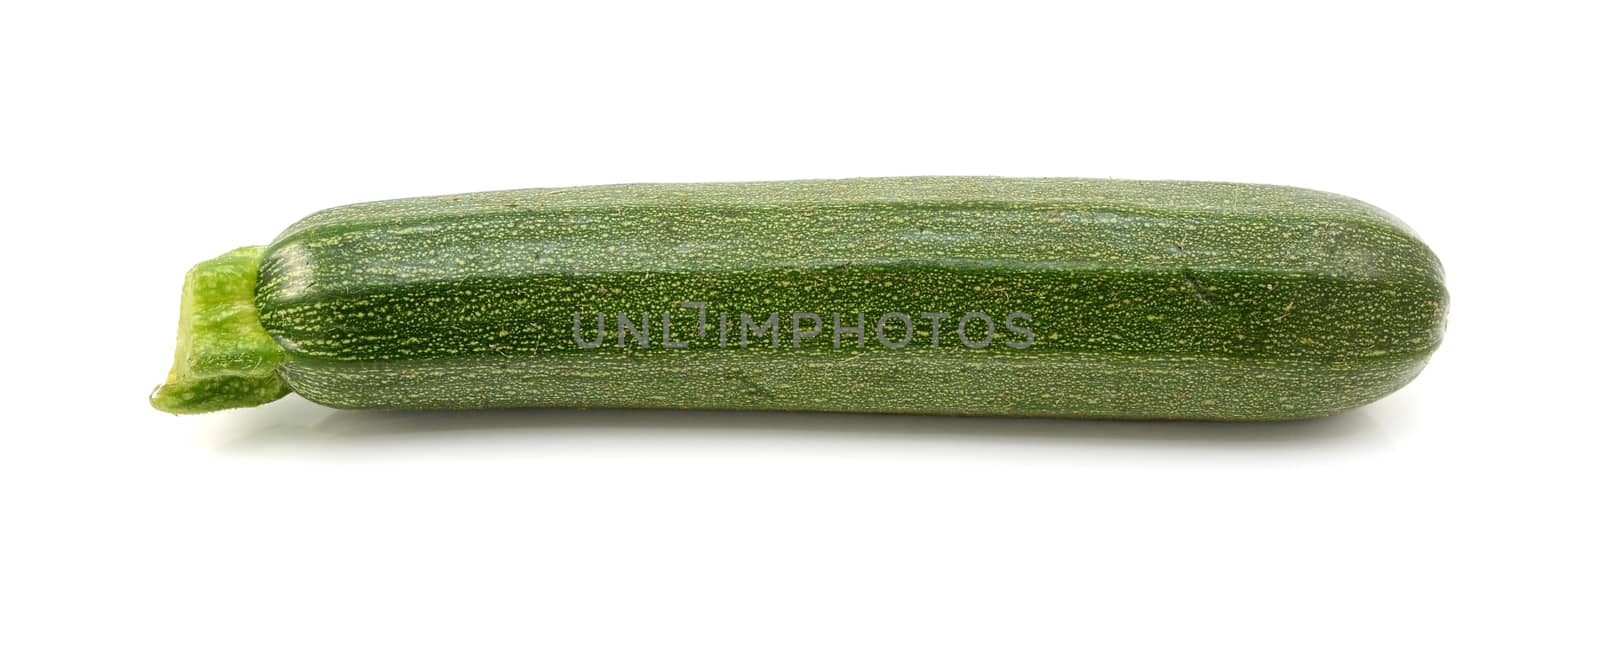 Small green courgette or zucchini, isolated on a white background